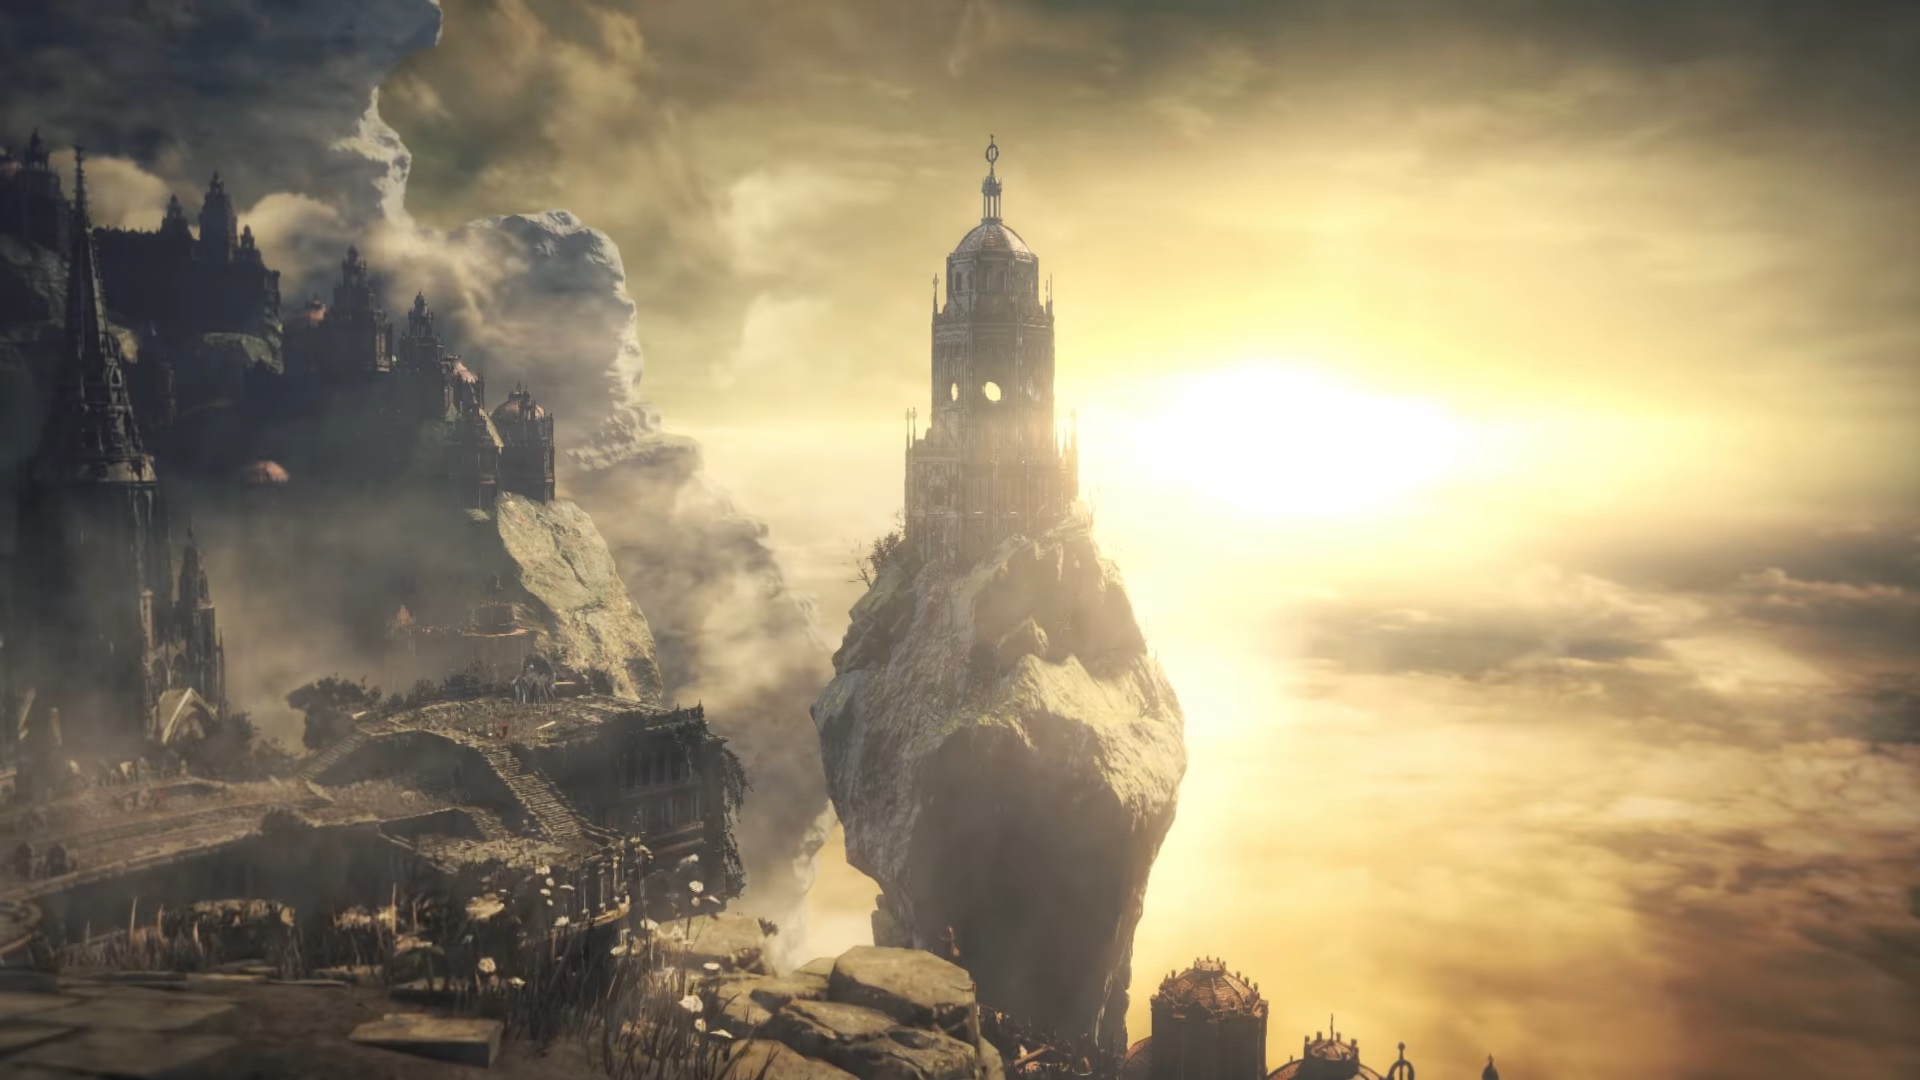 Dark Souls 3 The Ringed City DLC Gets New Screenshots and Launch